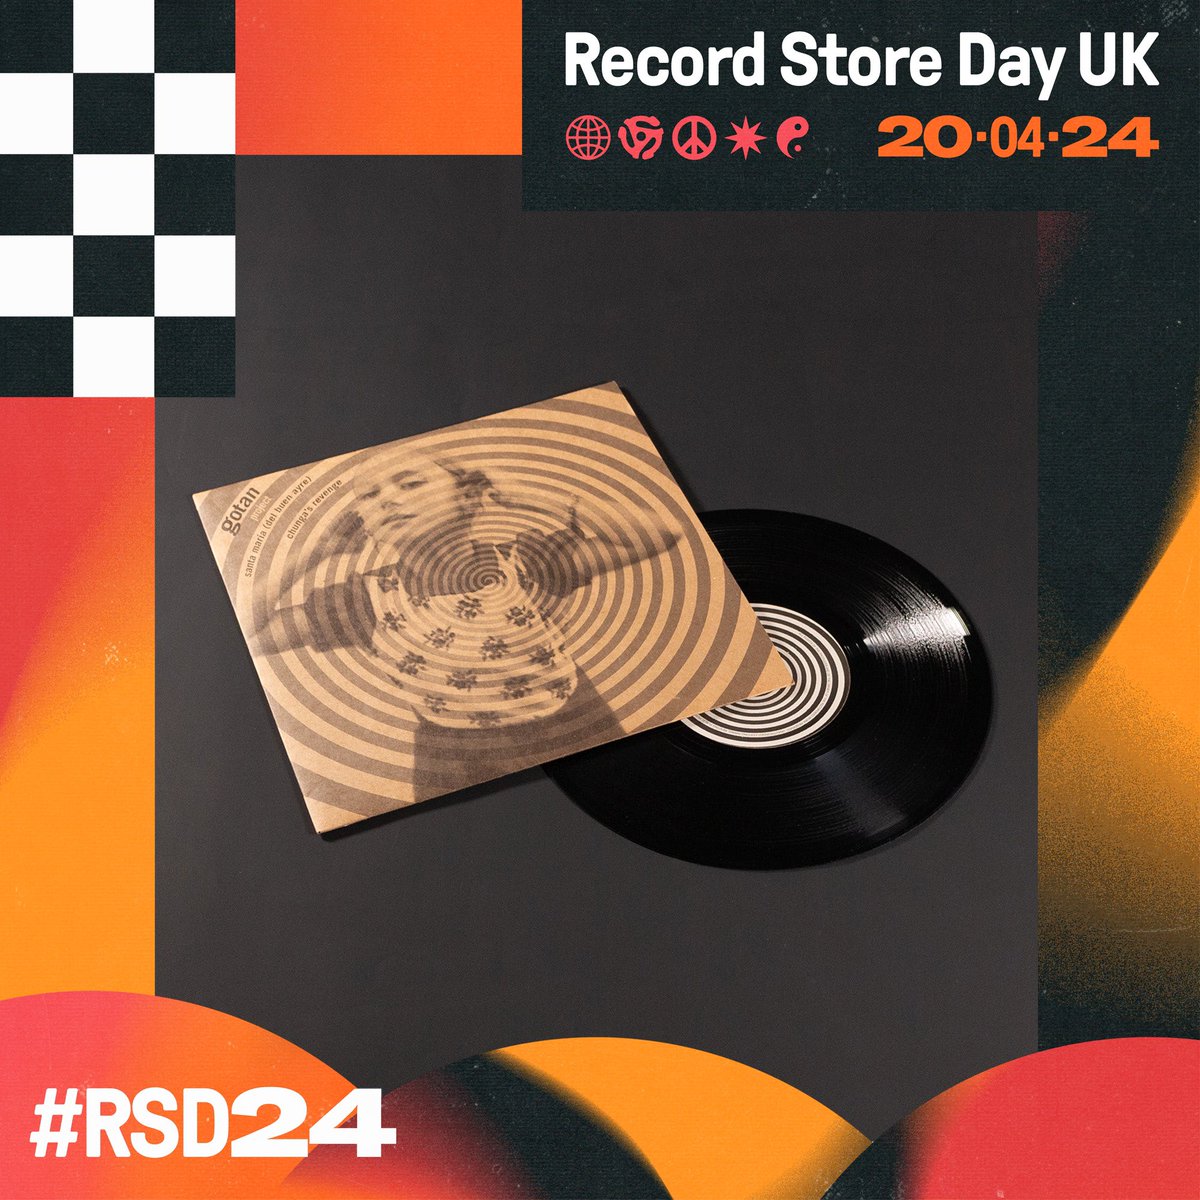 💿💃🏻 To celebrate Record Store Day, one of our most iconic song « Santa Maria (Del Buen Ayre) » is back in the shelves of your favorite UK records store in the form of a collector’s 10' vinyl. Find participating stores and more infos at recordstoreday.co.uk ❤️‍🔥